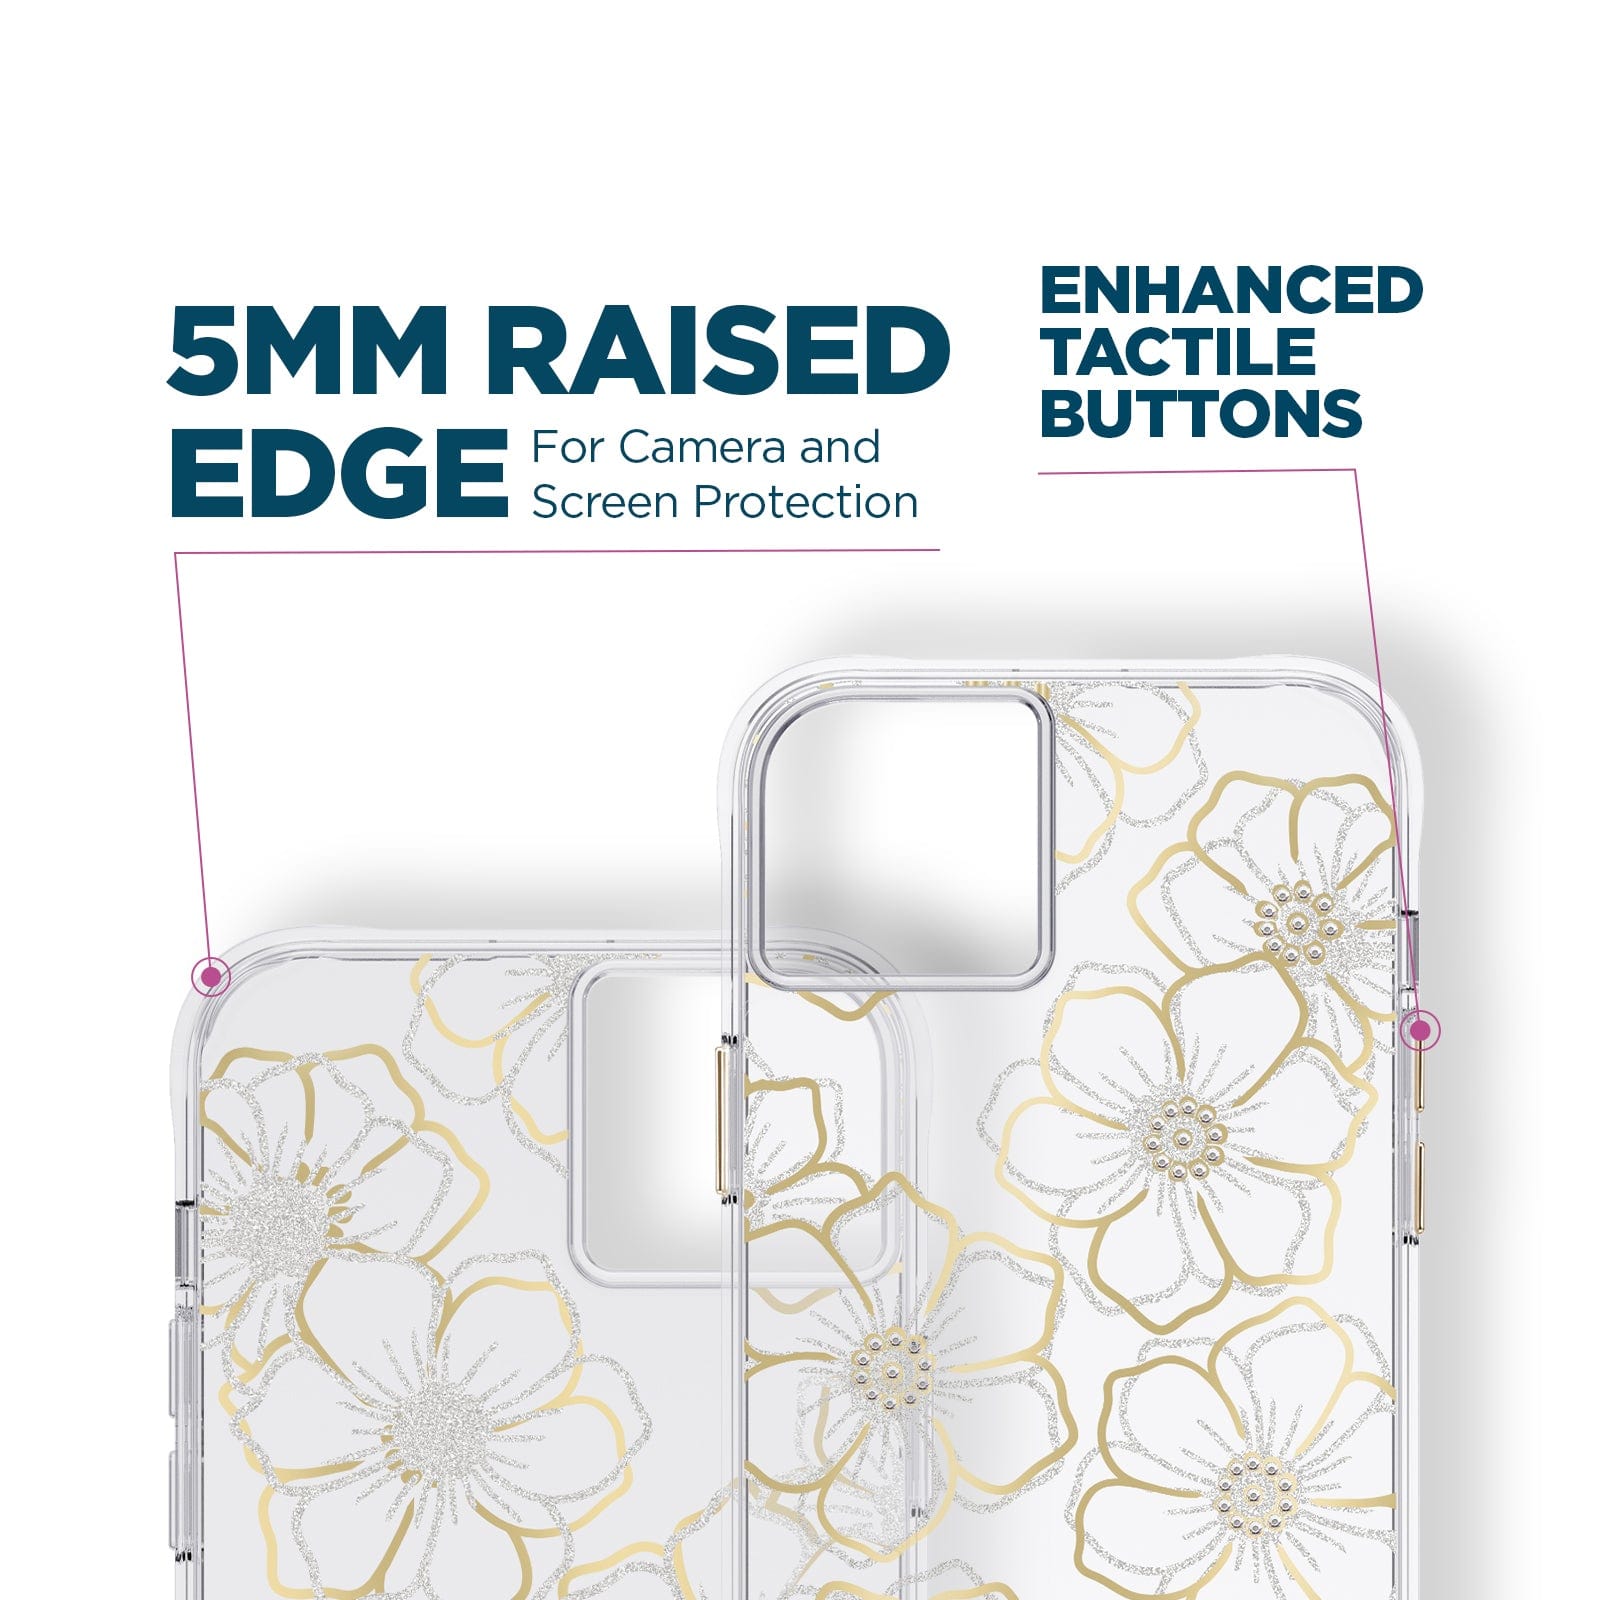 5mm raised edge for camera and screen protection. Enhanced tactile buttons.